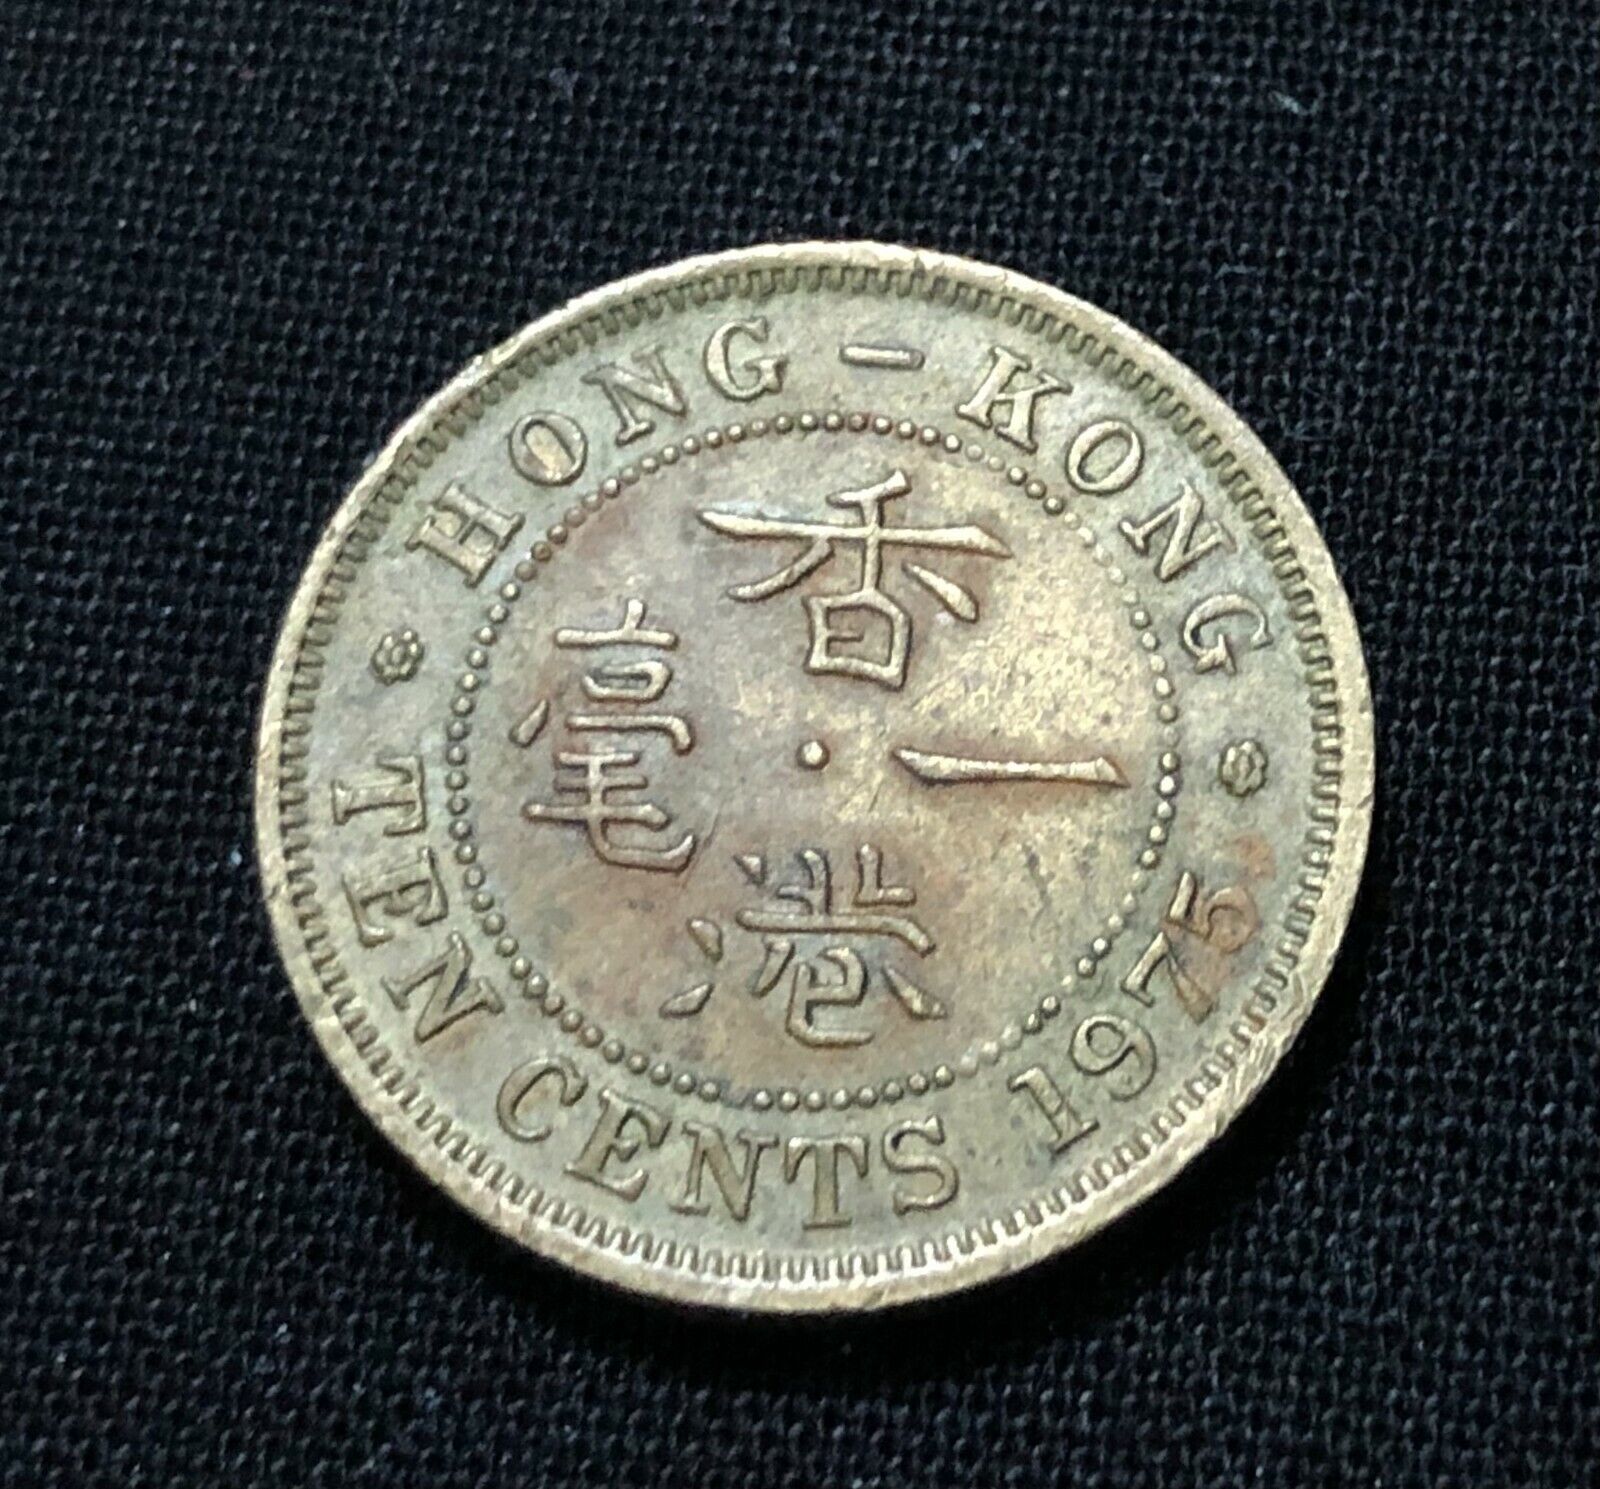 Hong Kong 10 Cents 1975. Asia World Coin Km28.1 Combined Shipping Discounts!